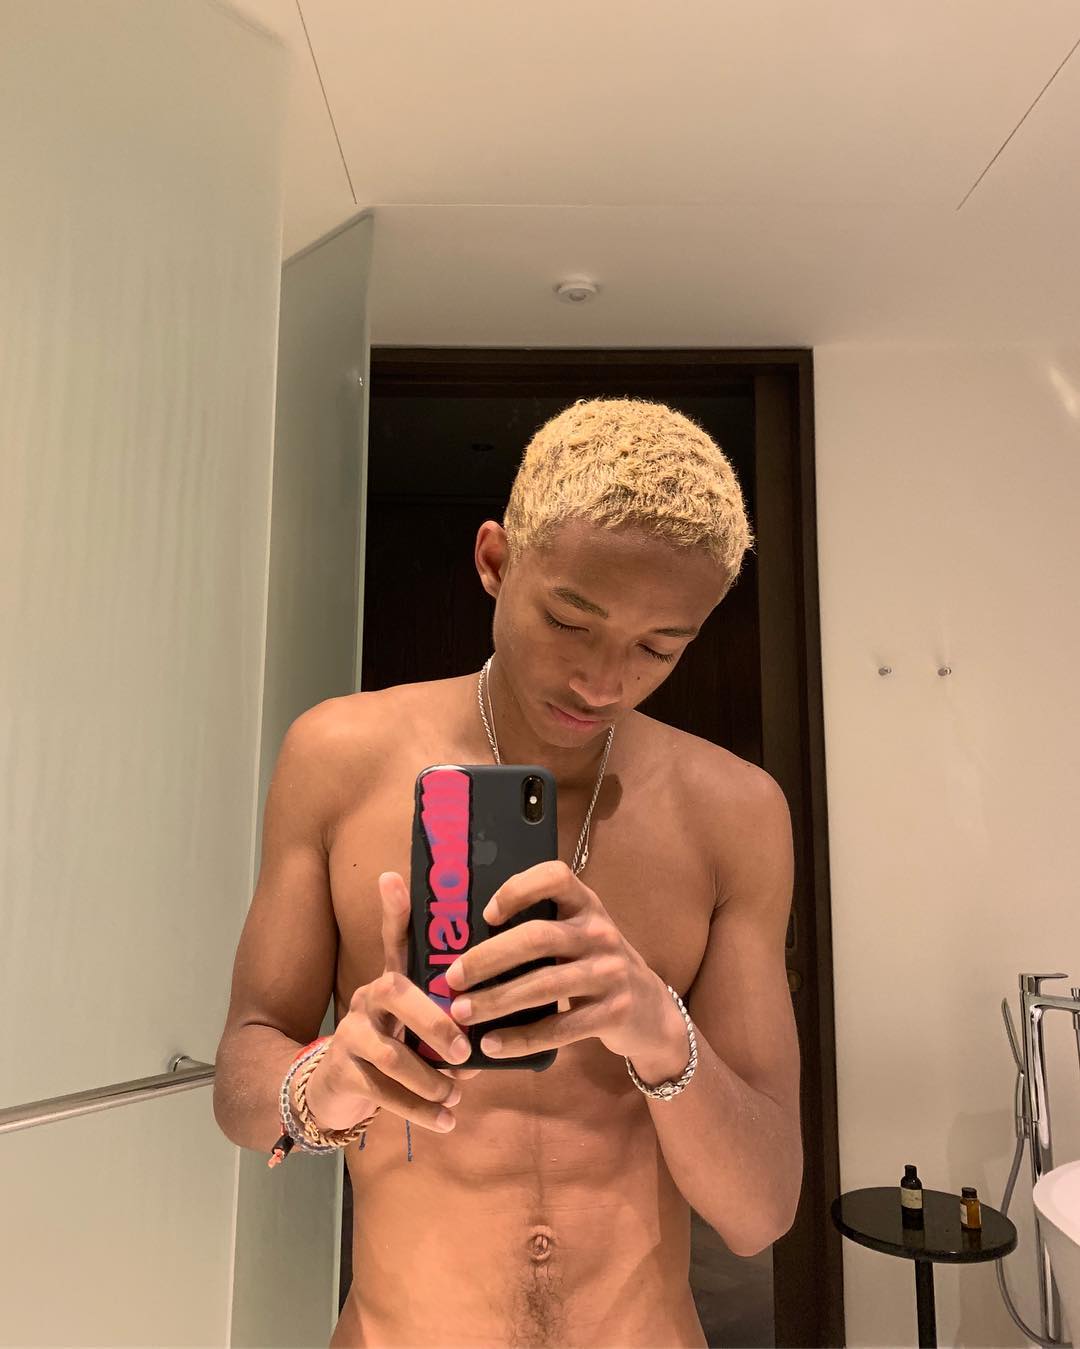 Celebrity Nudes 2022 on Twitter: "New sexy pic of Jaden Smith ðŸ”¥ Welco...